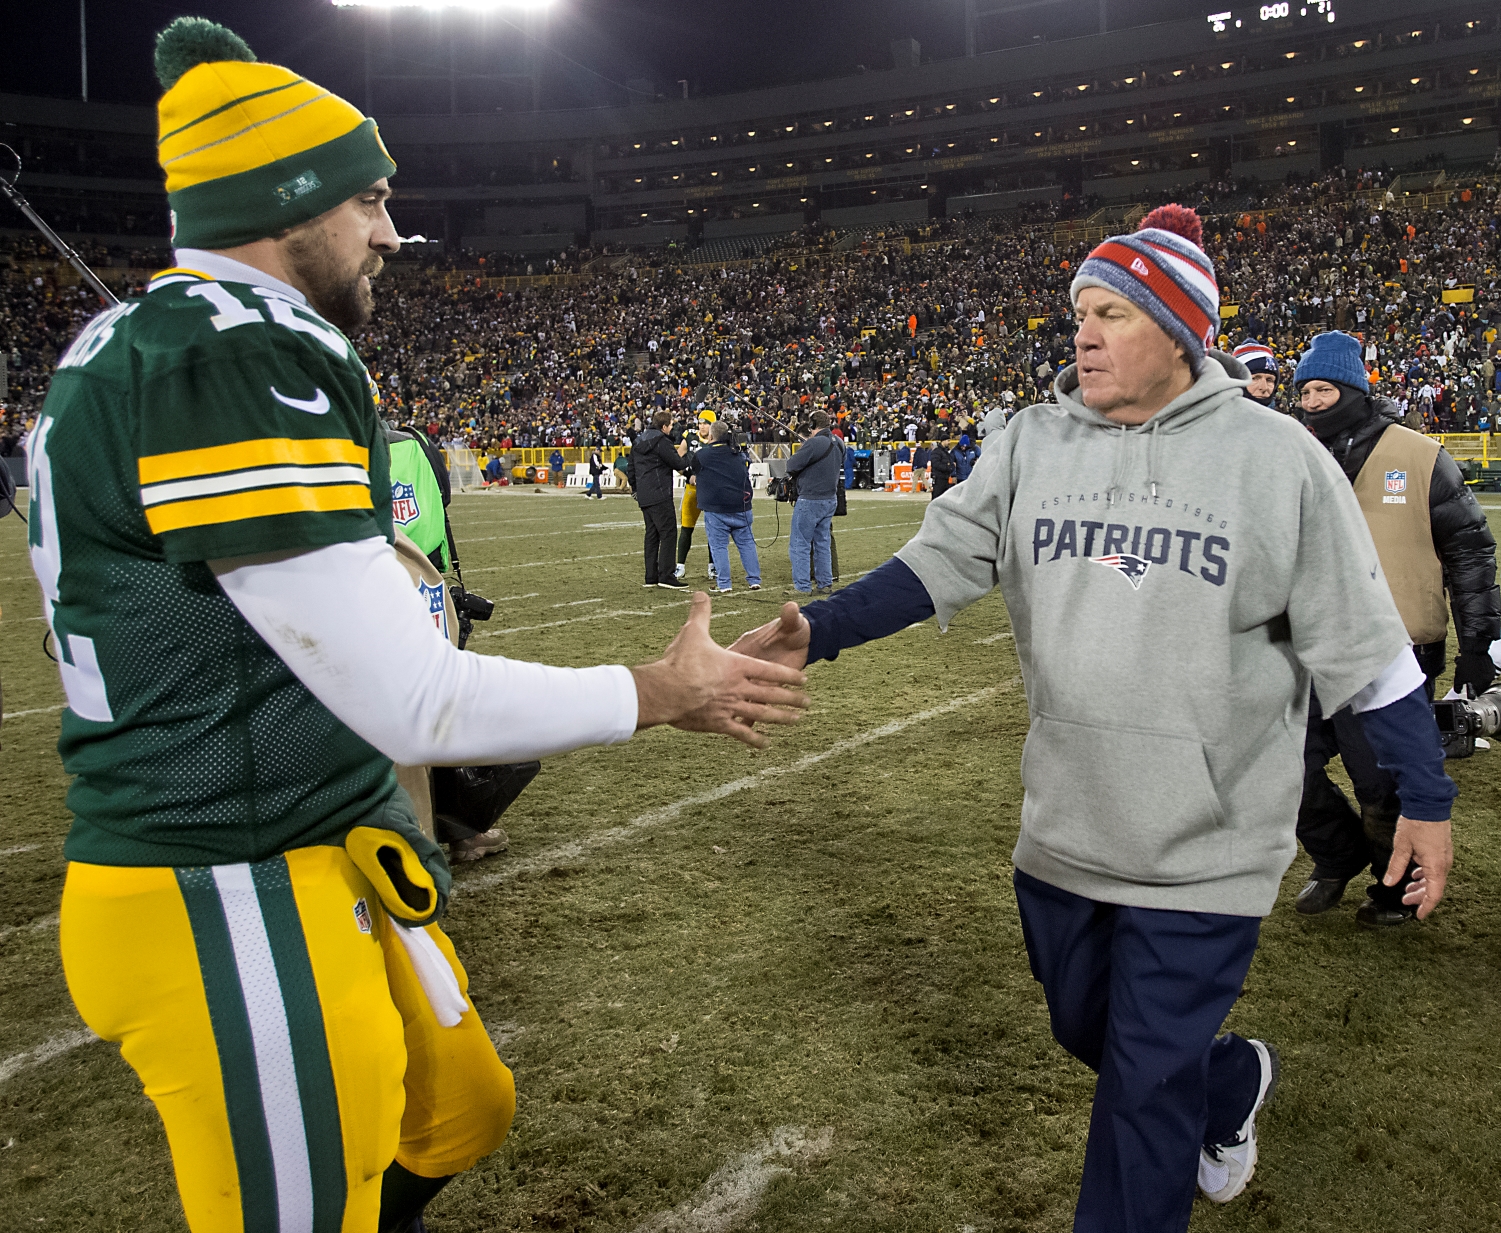 Green Bay Packers QB Aaron Rodgers and New England Patriots head coach Bill Belichick shake hands after a game.